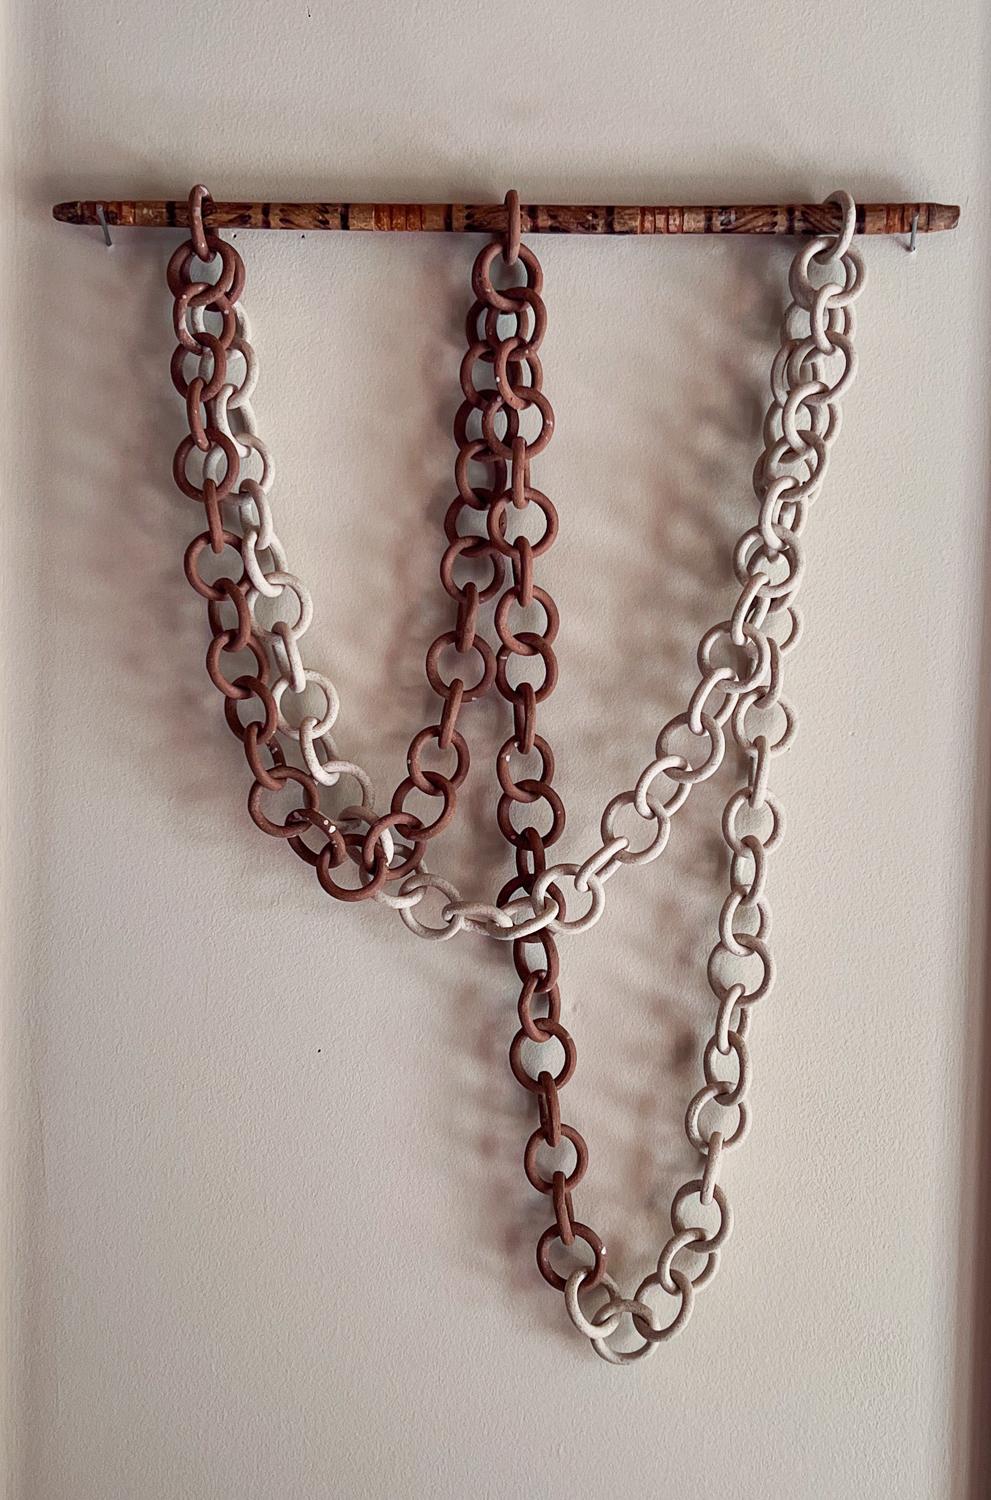 Contemporary Ceramic Link Chain Sculpture and Wall Hanging